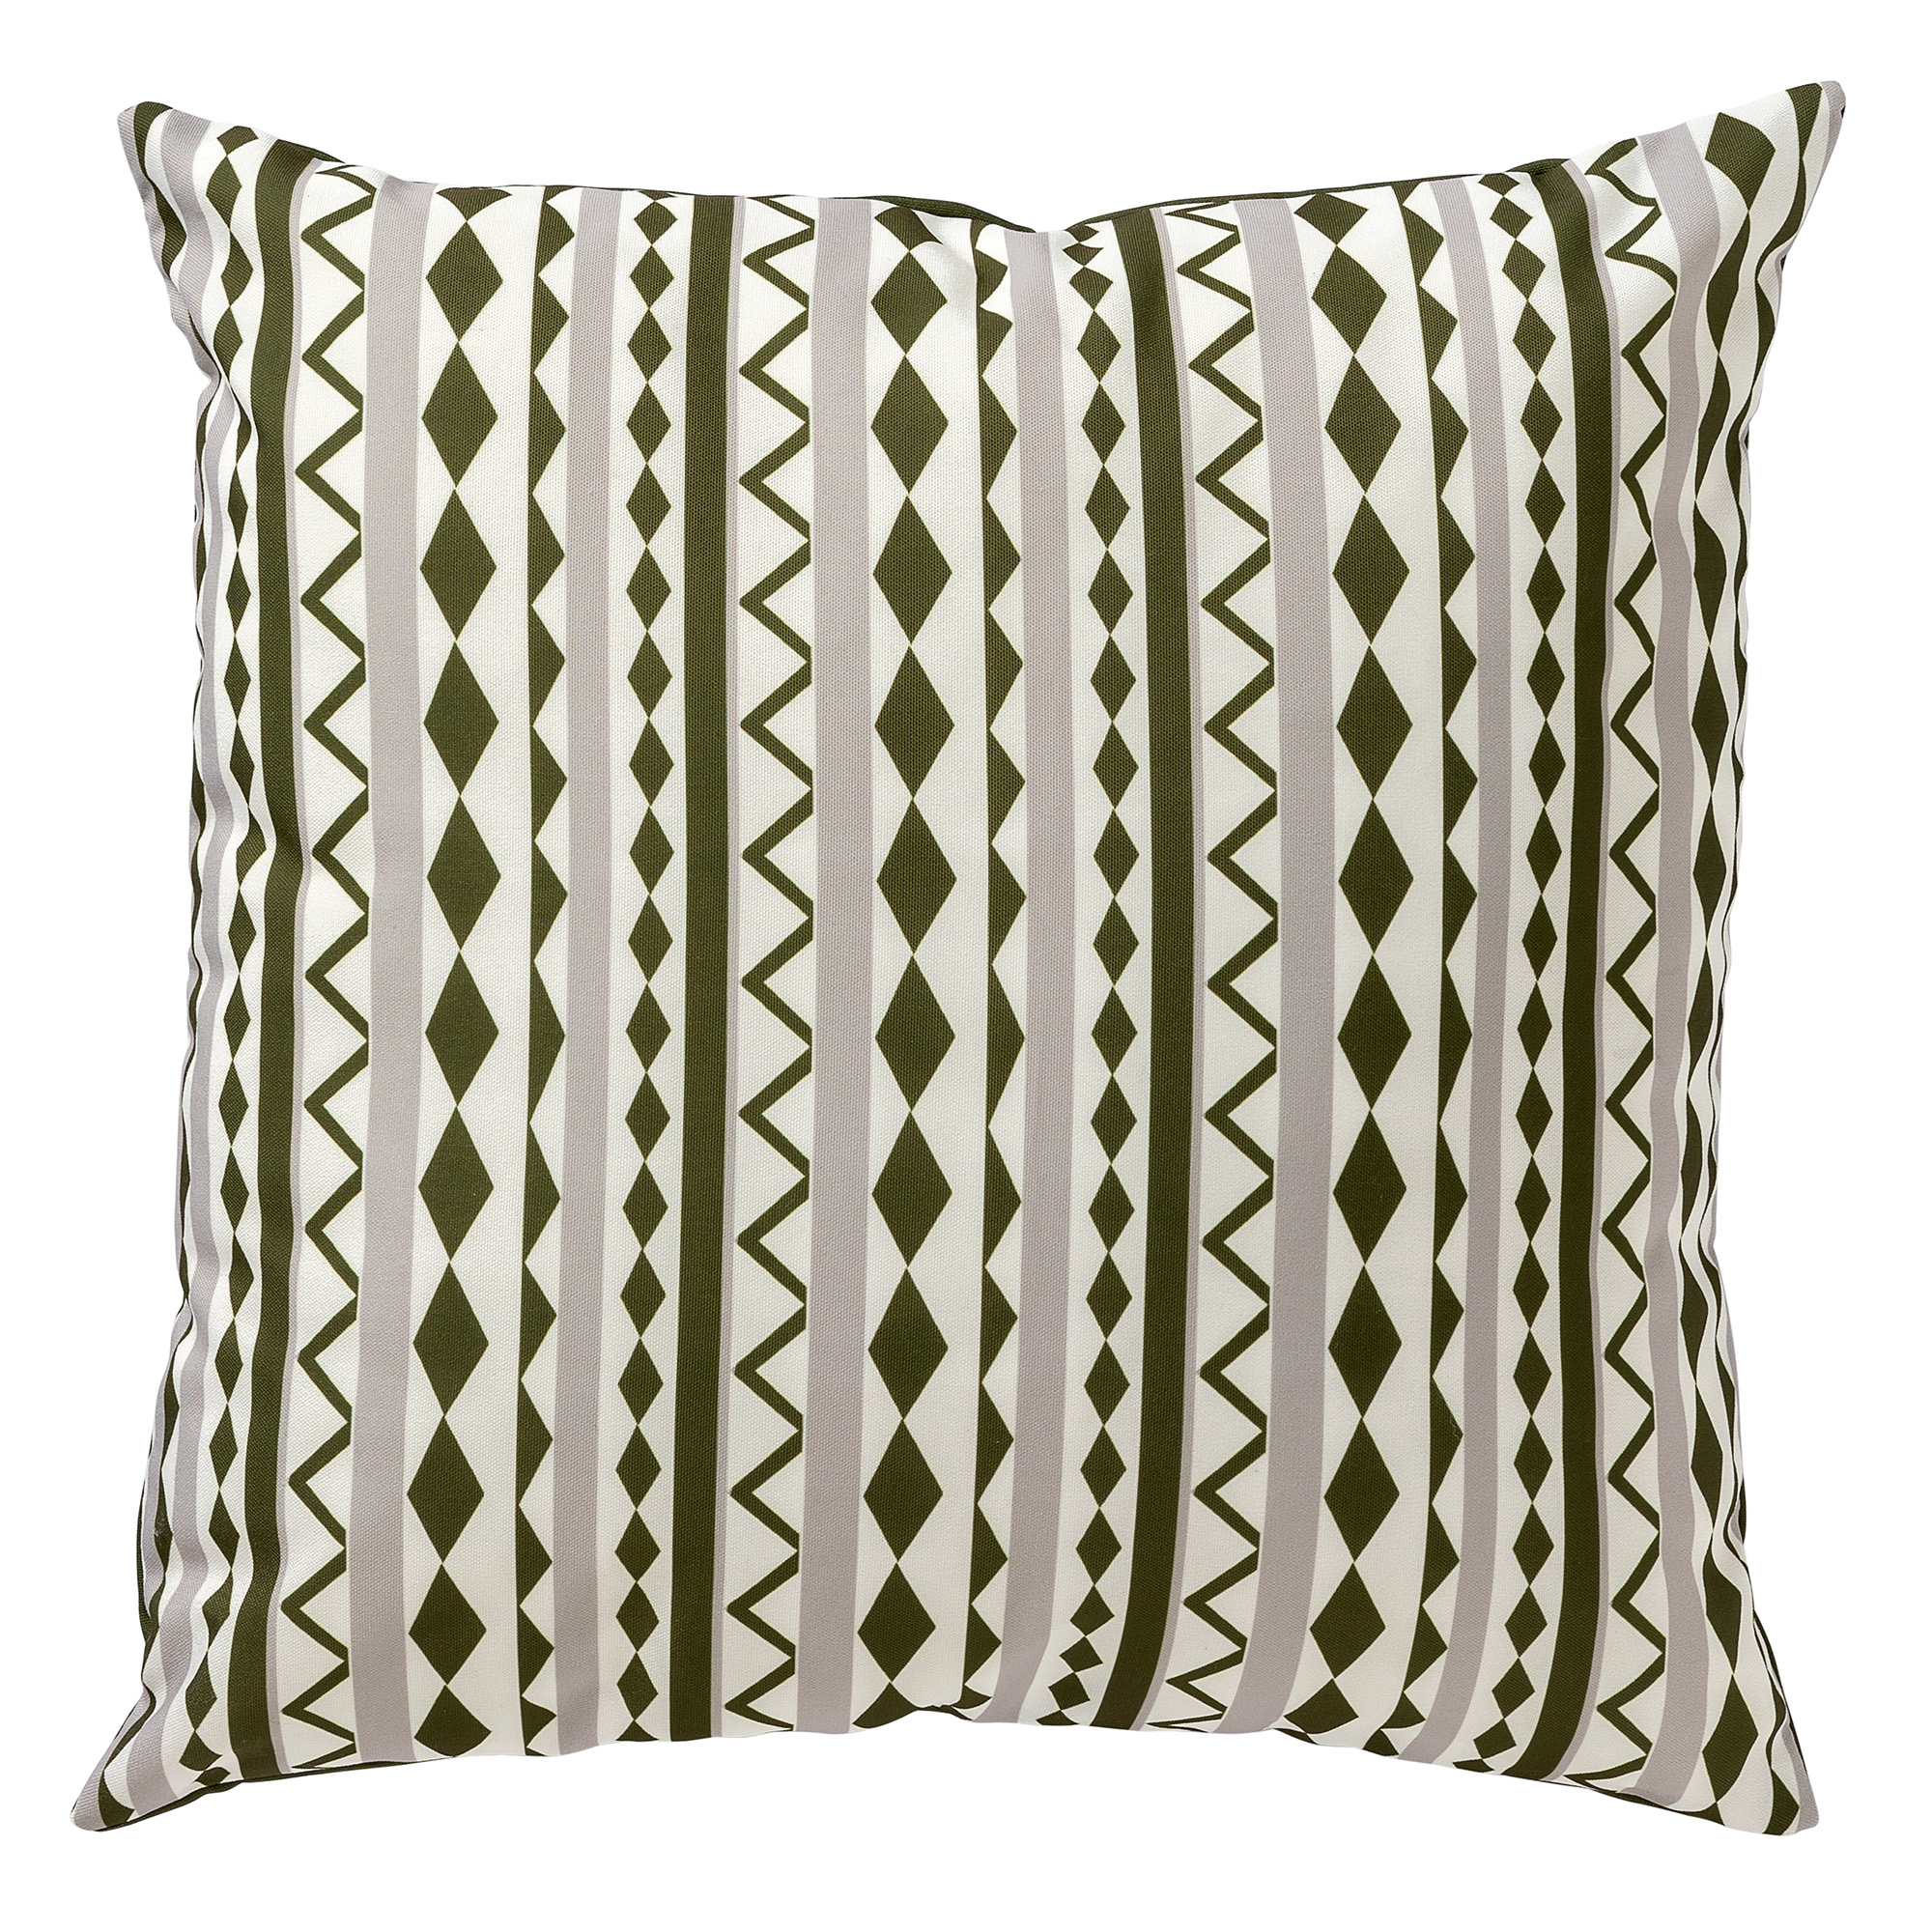 MAURO - Outdoor Cushion 45x45 cm Olive Branch - green